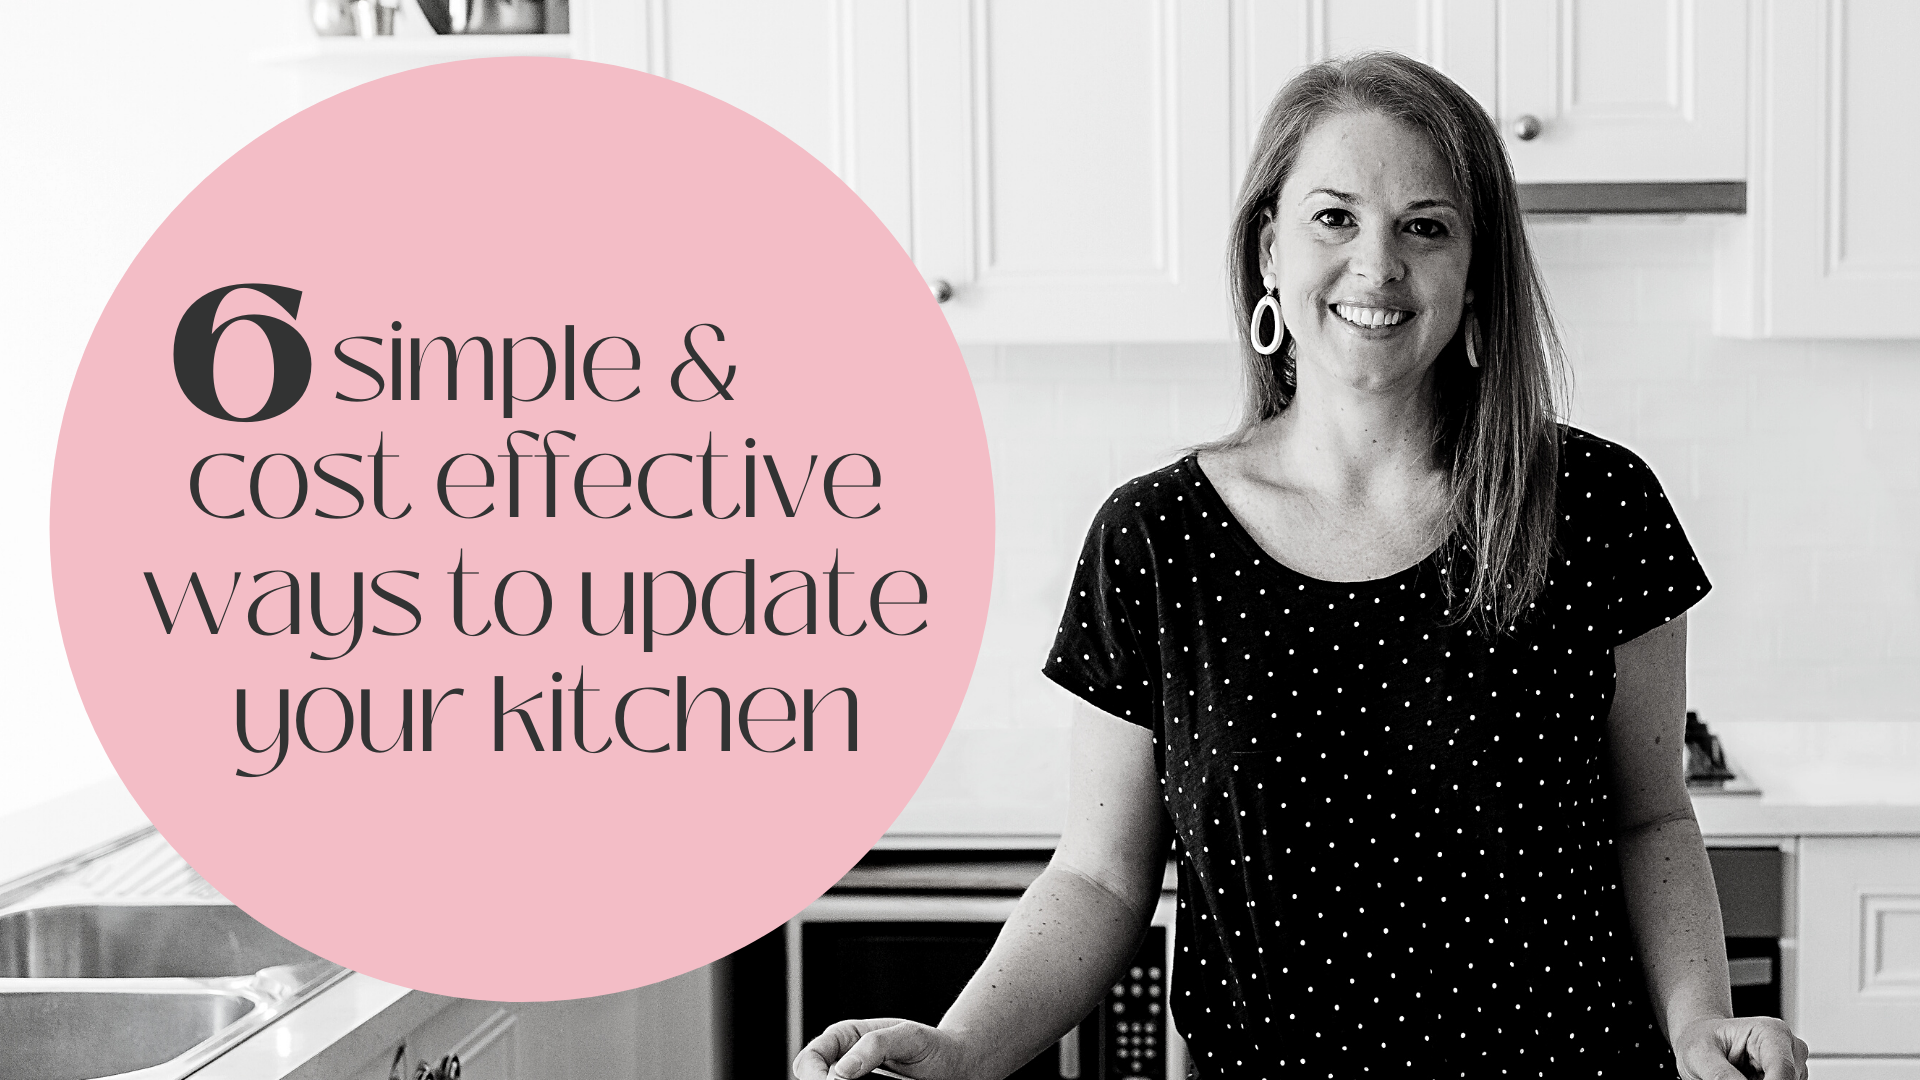 Simple and cost effective ways to update your kitchen